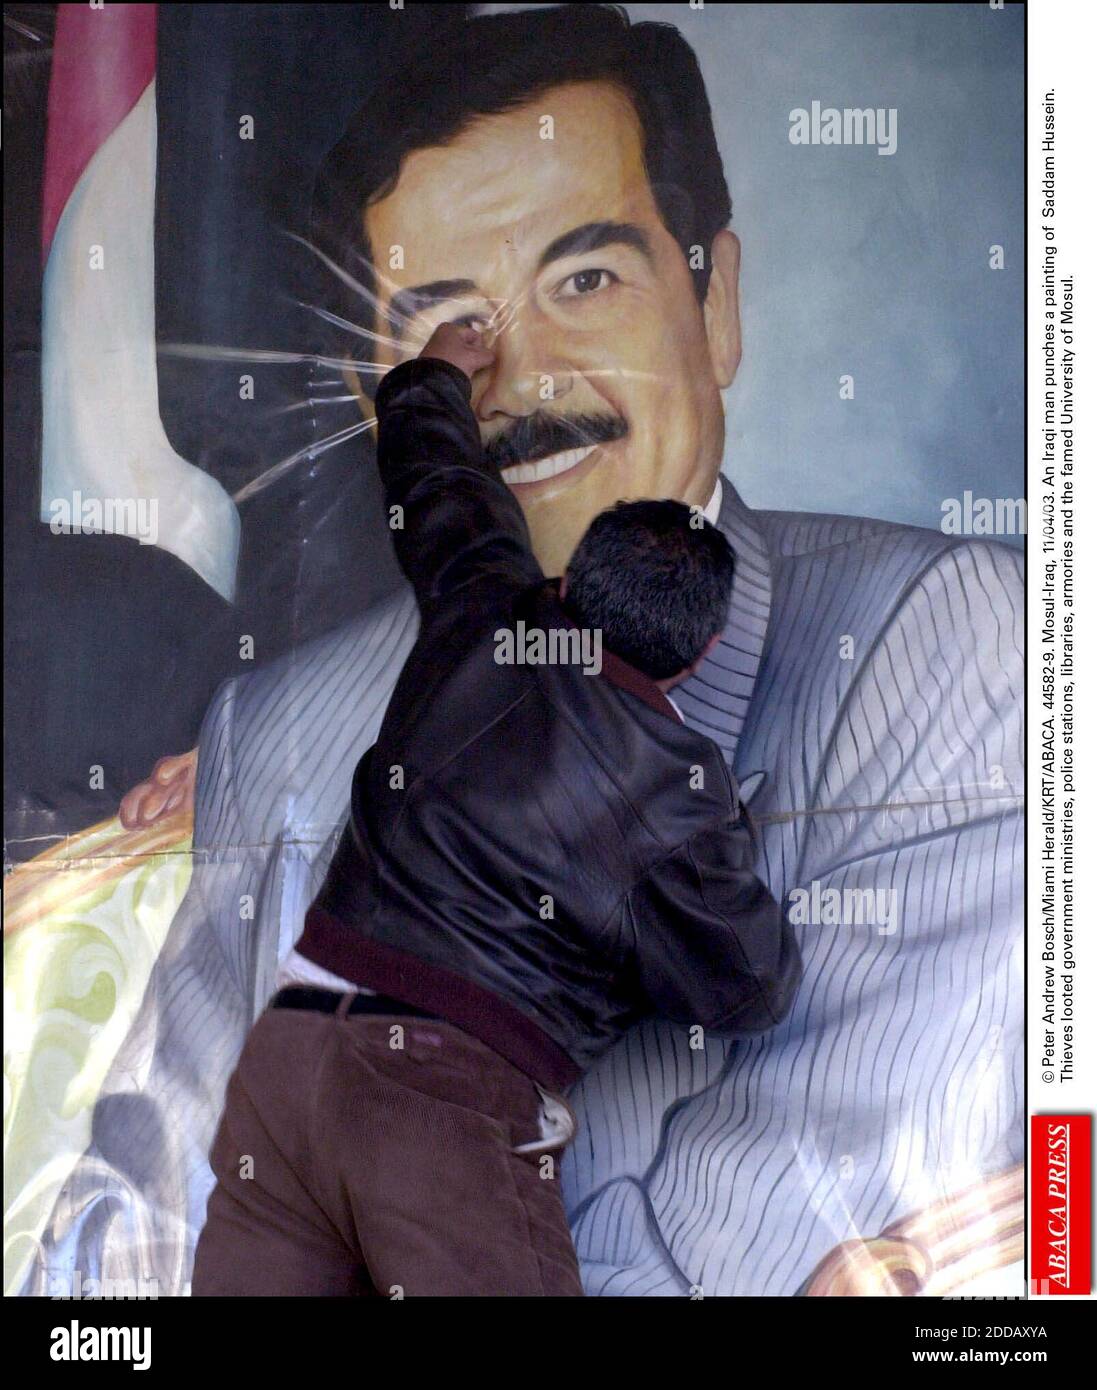 NO FILM, NO VIDEO, NO TV, NO DOCUMENTARY - © Peter Andrew Bosch/Miami Herald/KRT/ABACA. 44582-9. Mosul-Iraq, 11/04/03. An Iraqi man punches a painting of Saddam Hussein. Thieves looted government ministries, police stations, libraries, armories and the famed University of Mosul. Stock Photo